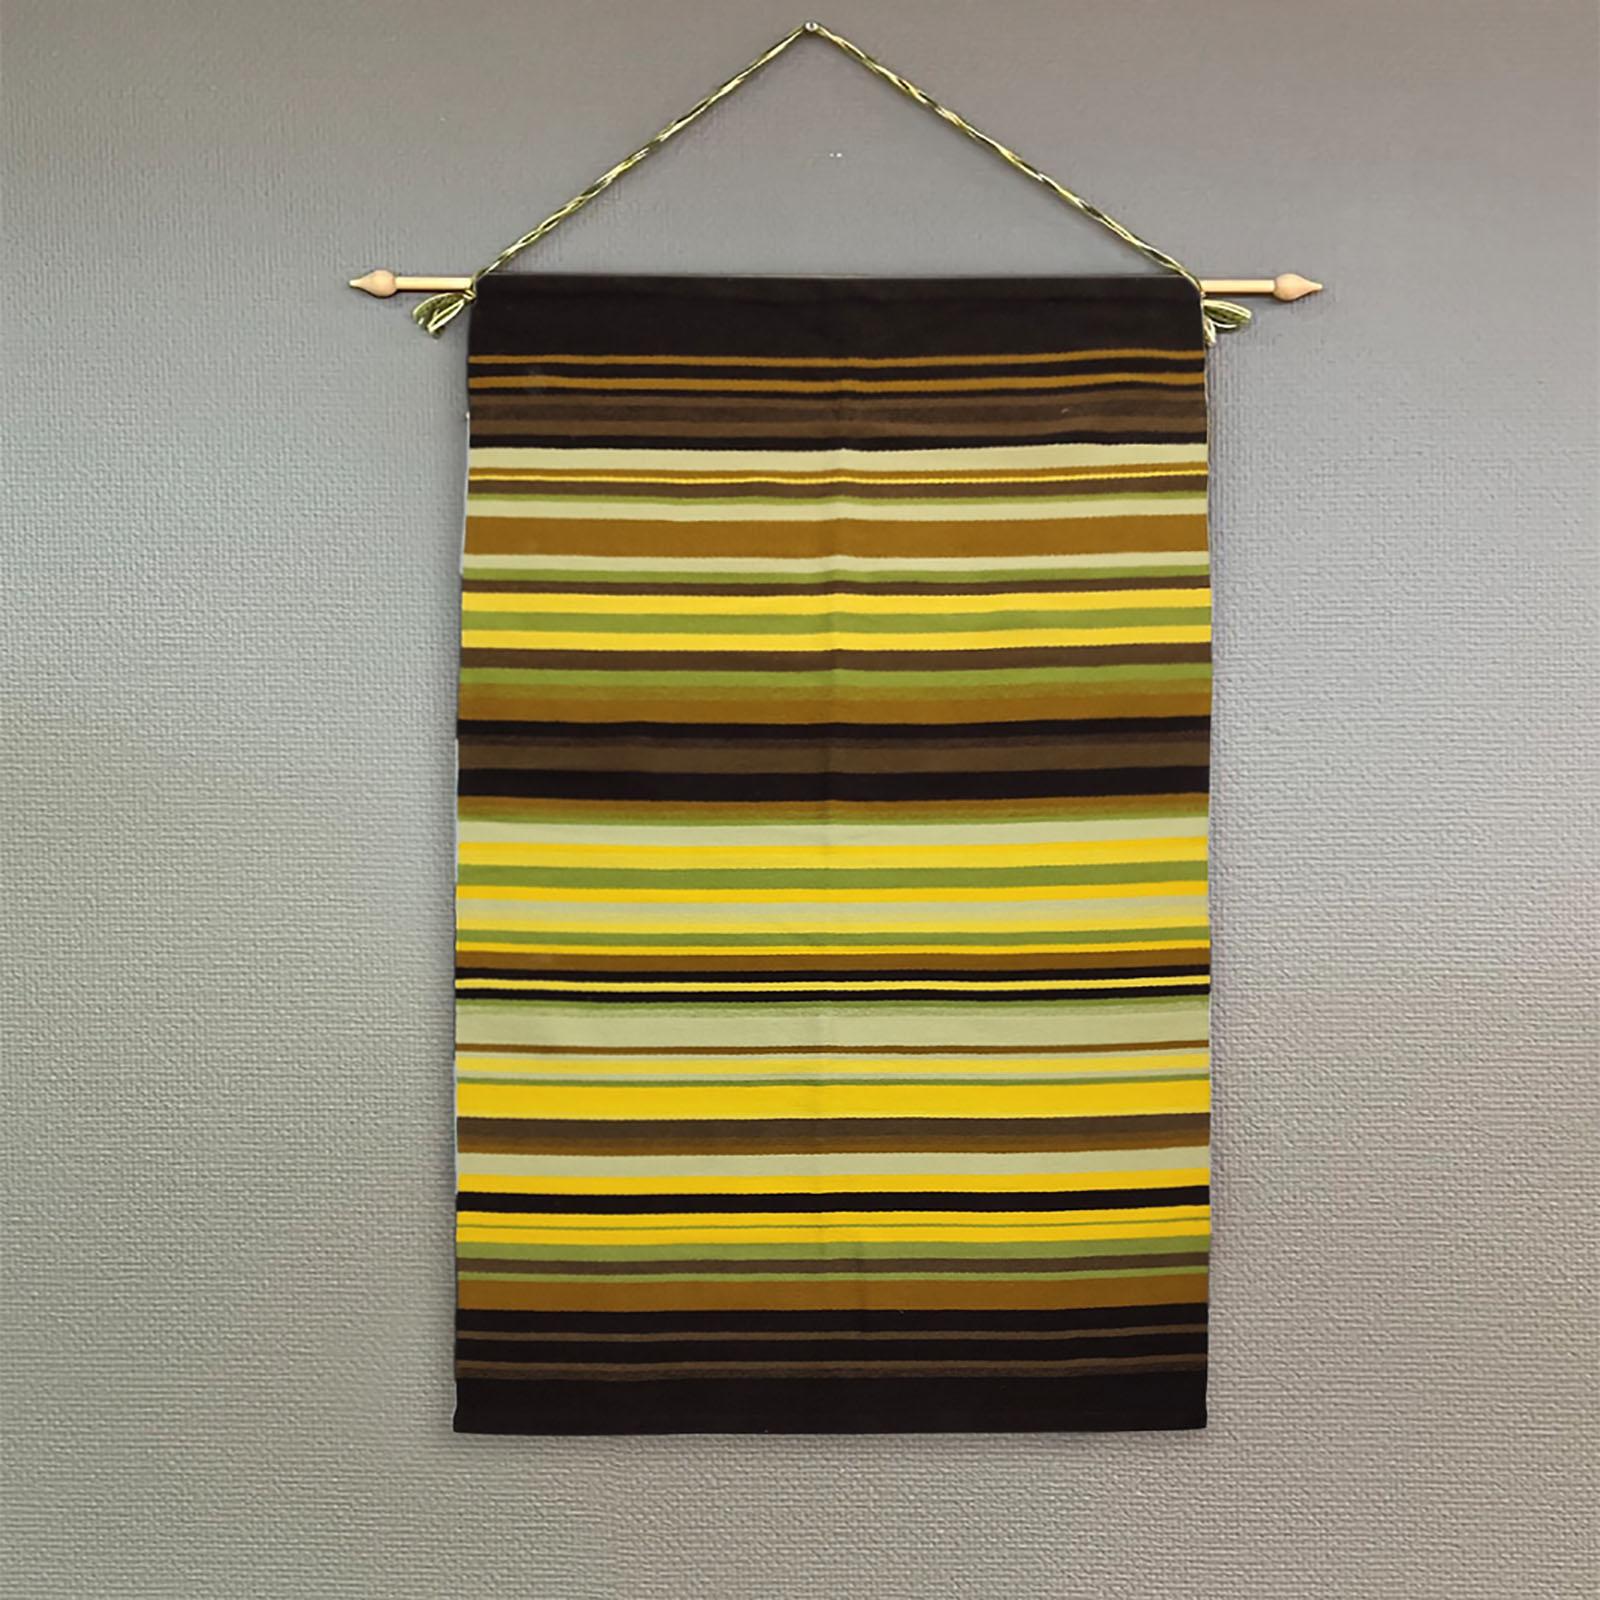 Handmade Finnish Raanu mid-century tapestry wall hanging or Runner, 1960s

Scandinavian vintage wool wall hanging handmade weaving tapestry.
This beautiful hand-woven wall decor is made of wool, traditional Finnish crafts .
Wonderful colors like